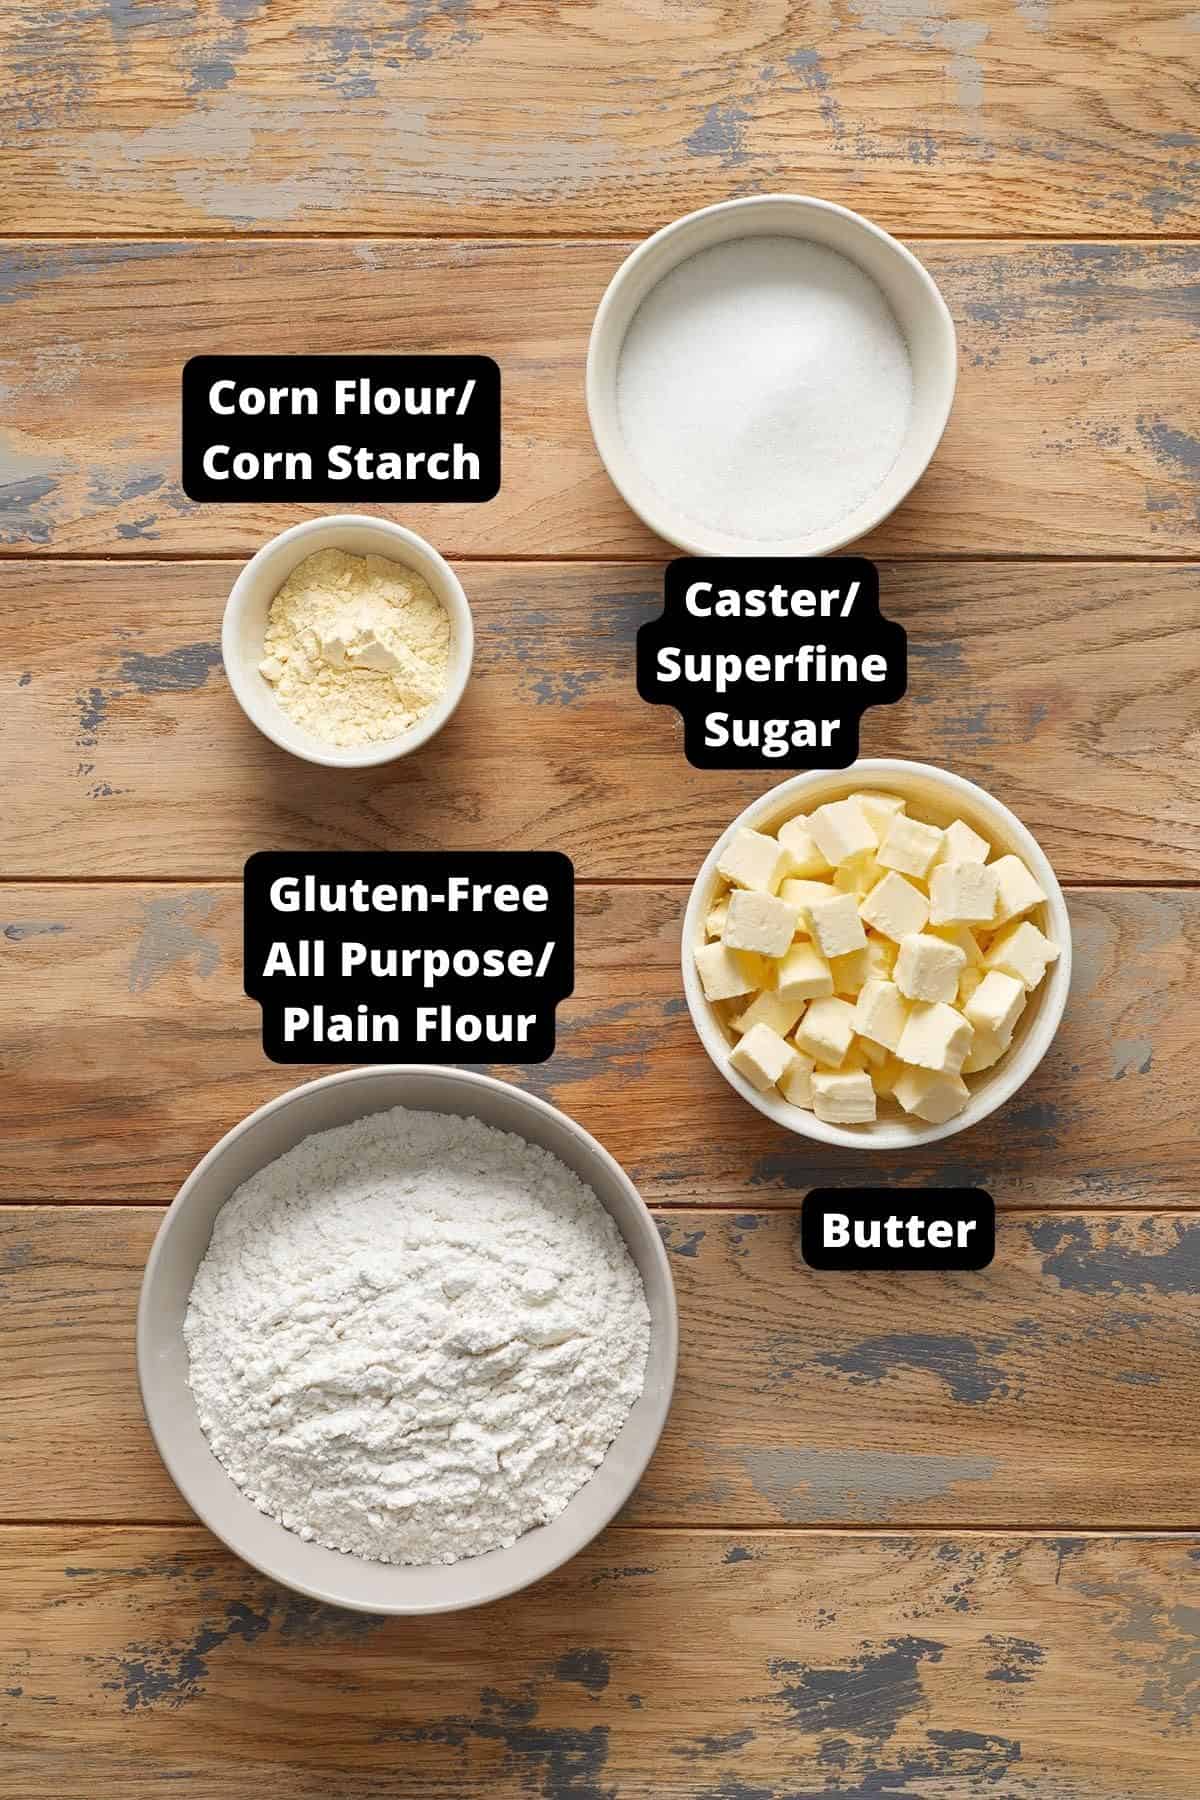 Ingredients in this recipe on a wooden background.